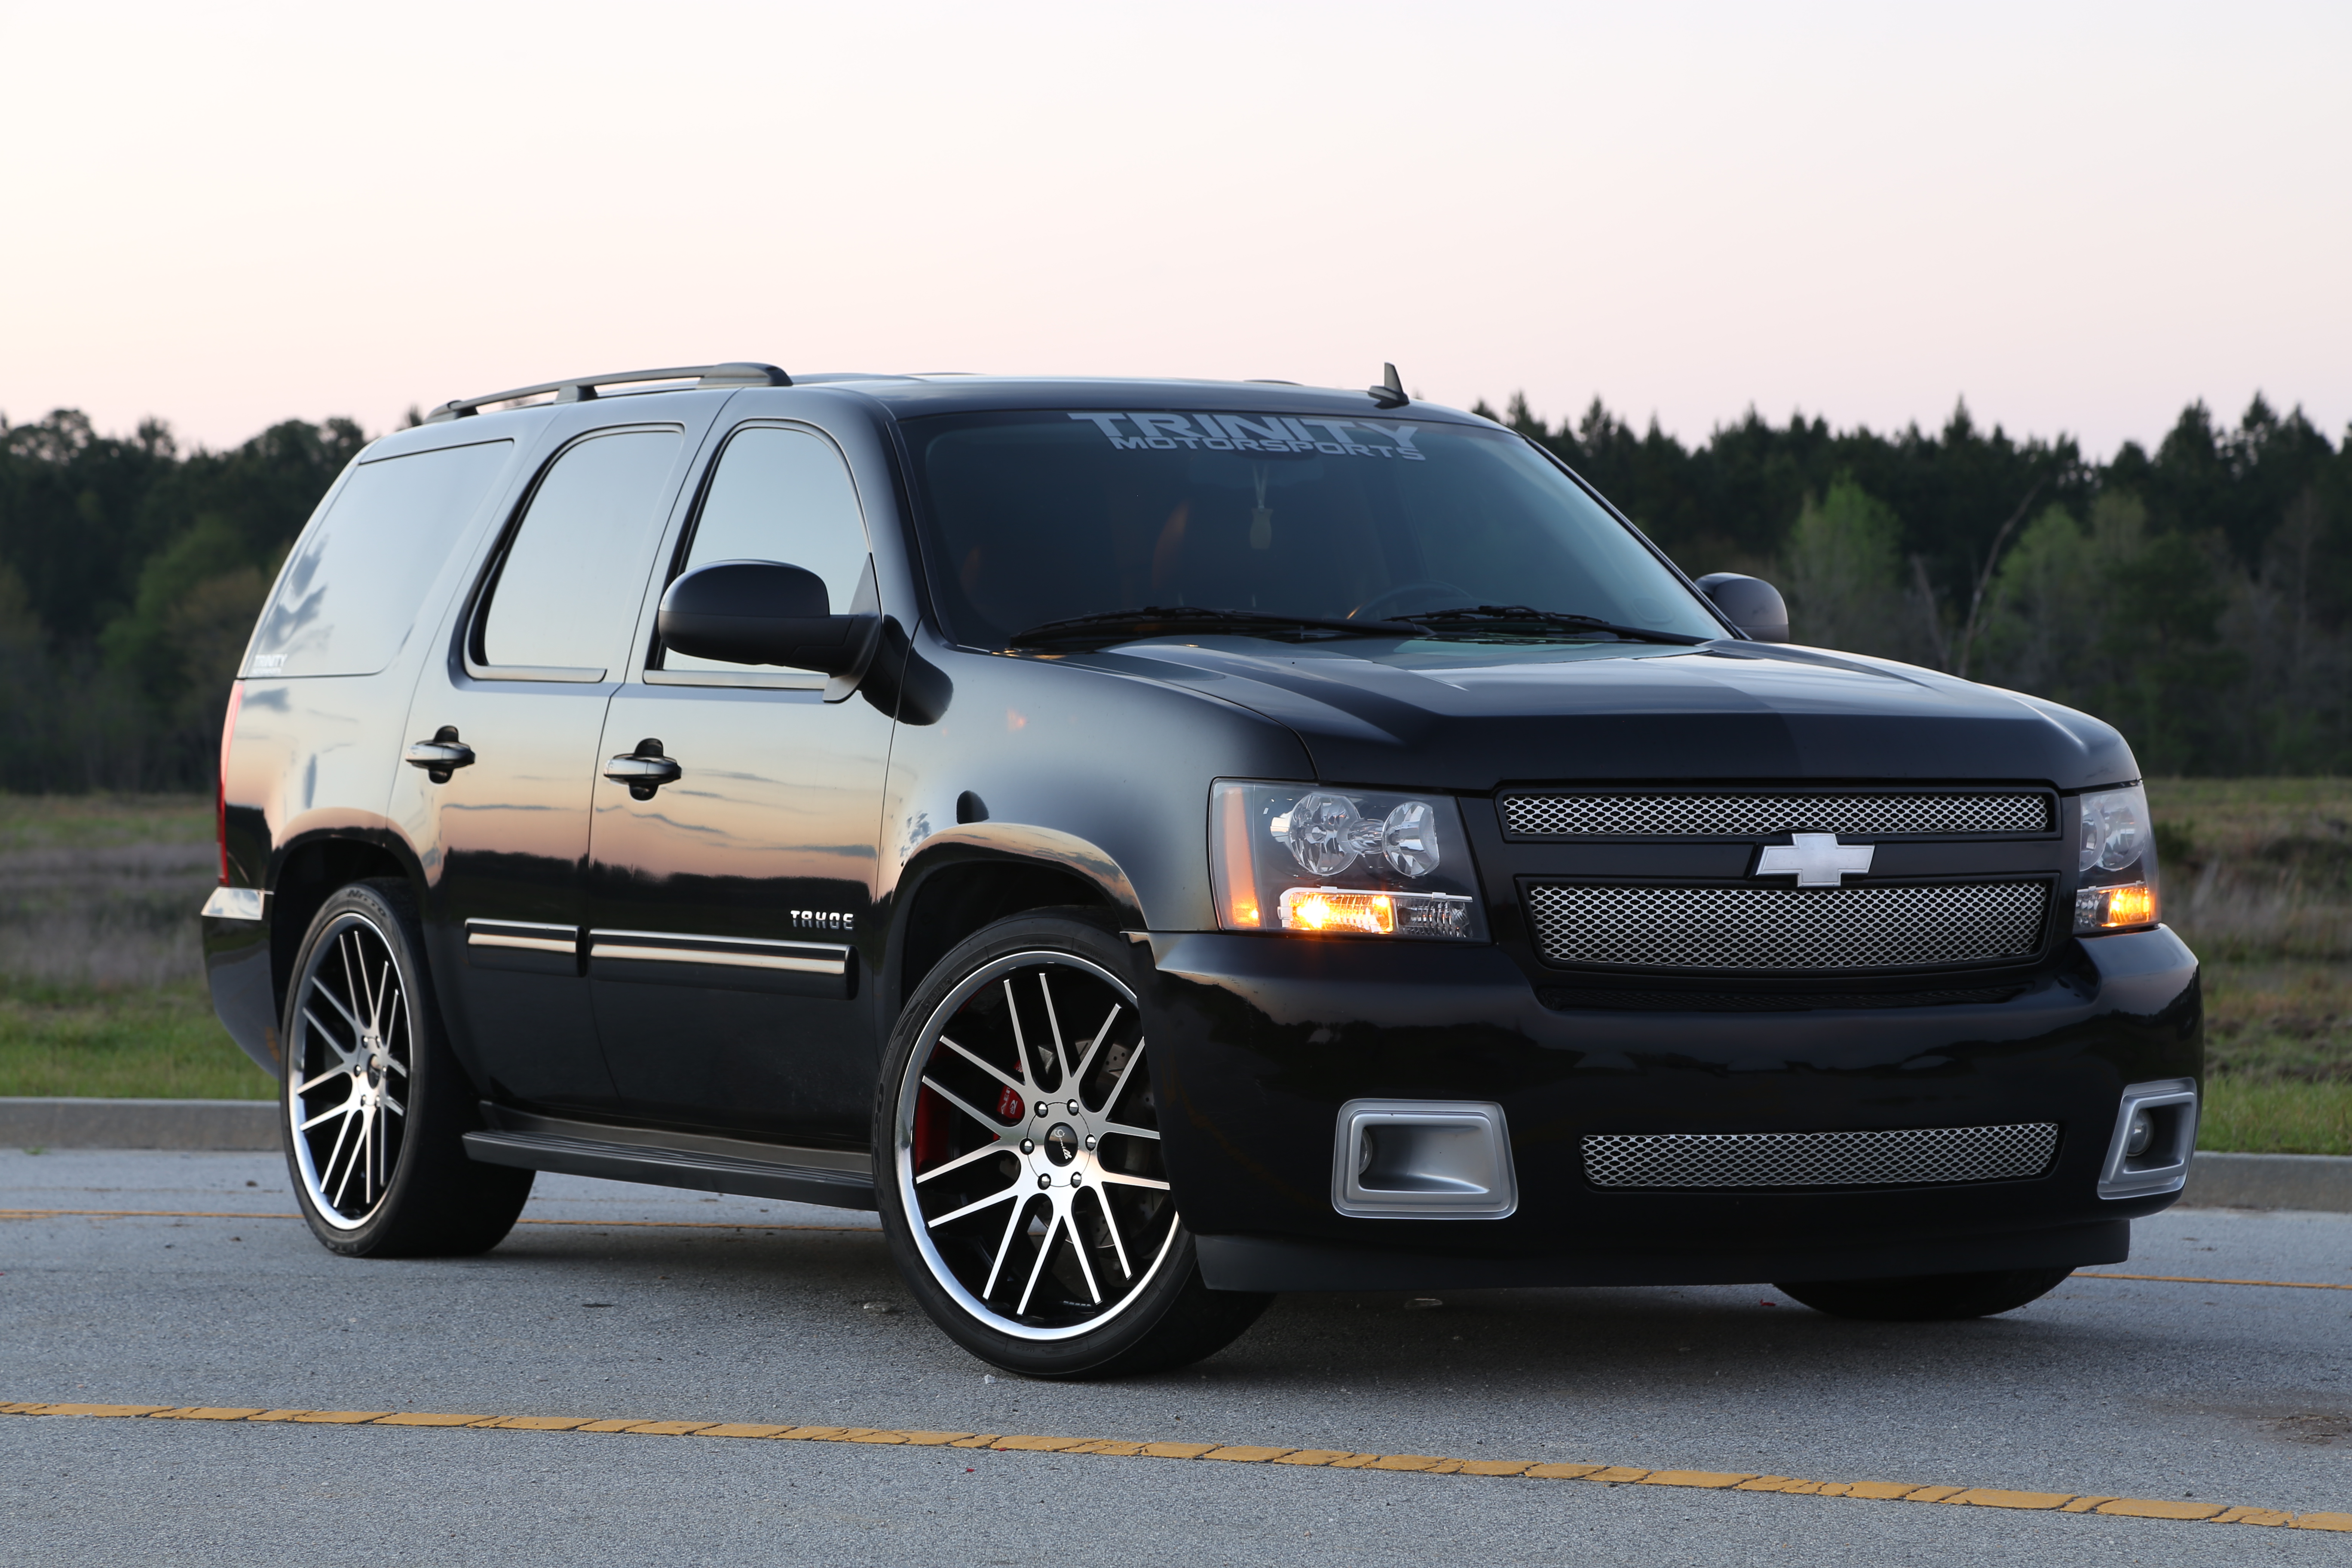 Lowered and Magnuson Supercharged 2010 Tahoe on 24s - Trinity Motorsports.